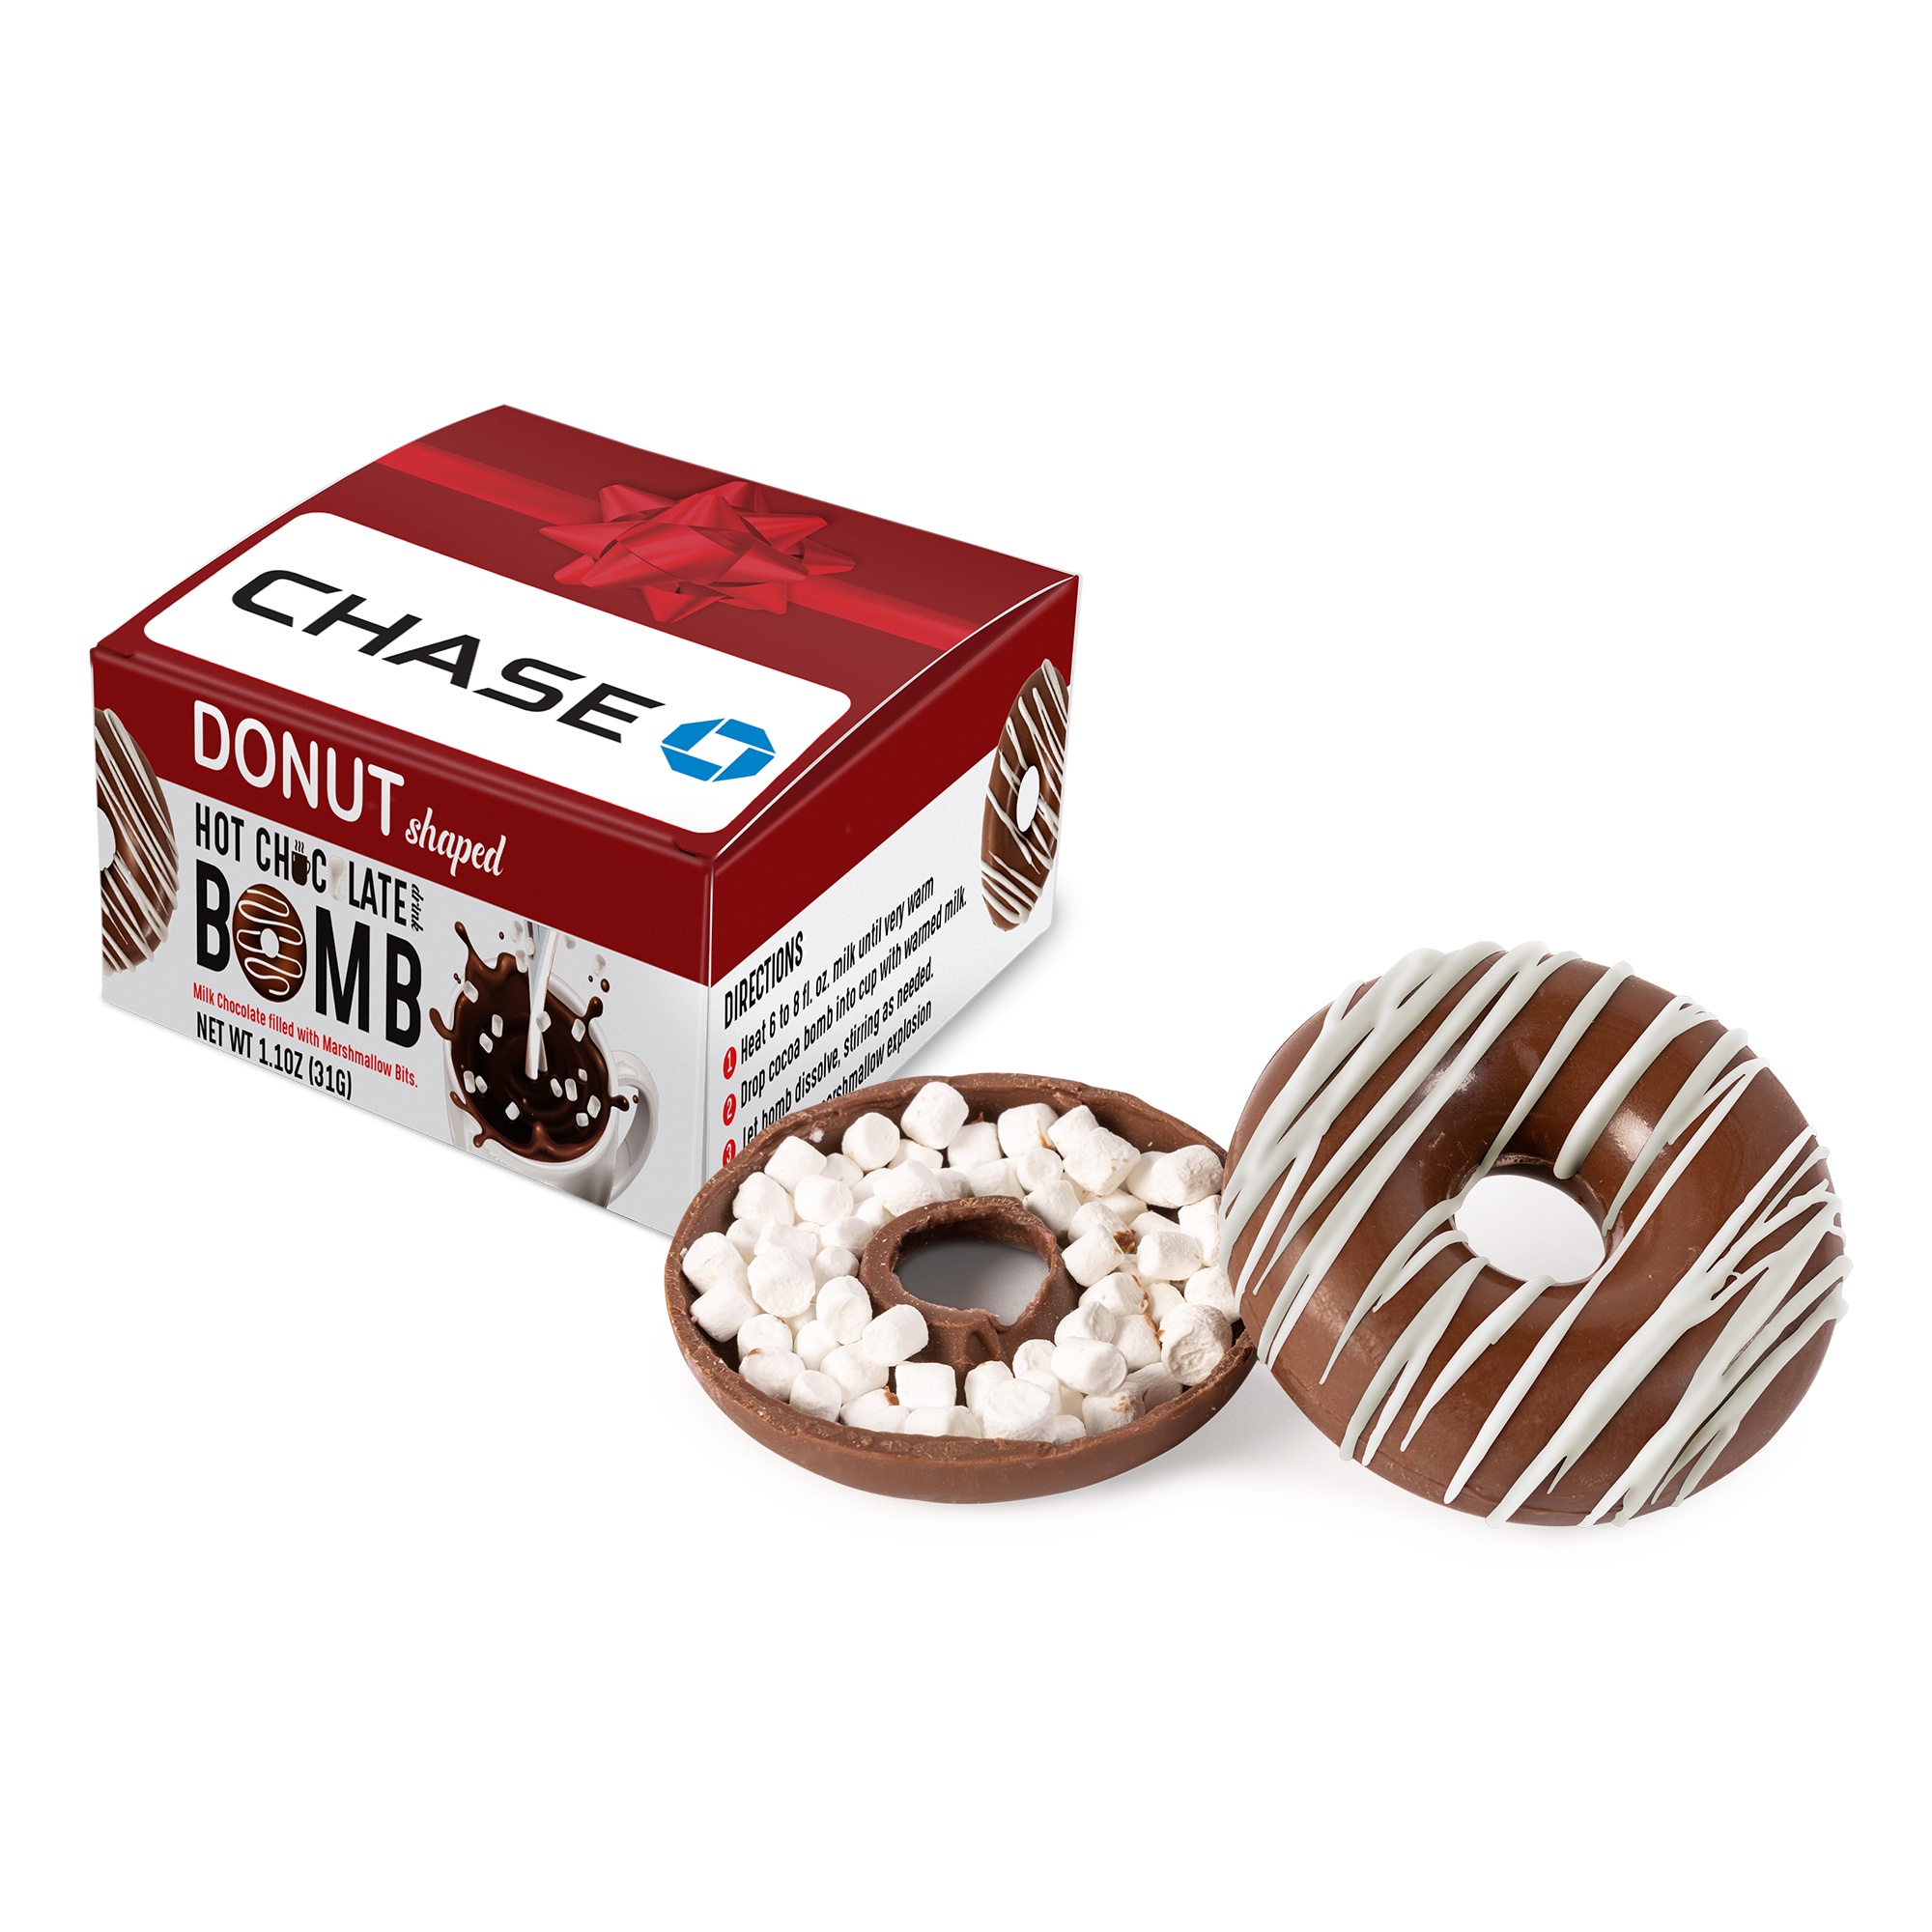 NC Custom: Donut-Shaped Hot Chocolate Bomb with Drizzle. Supplied By:  Chocolate Inn